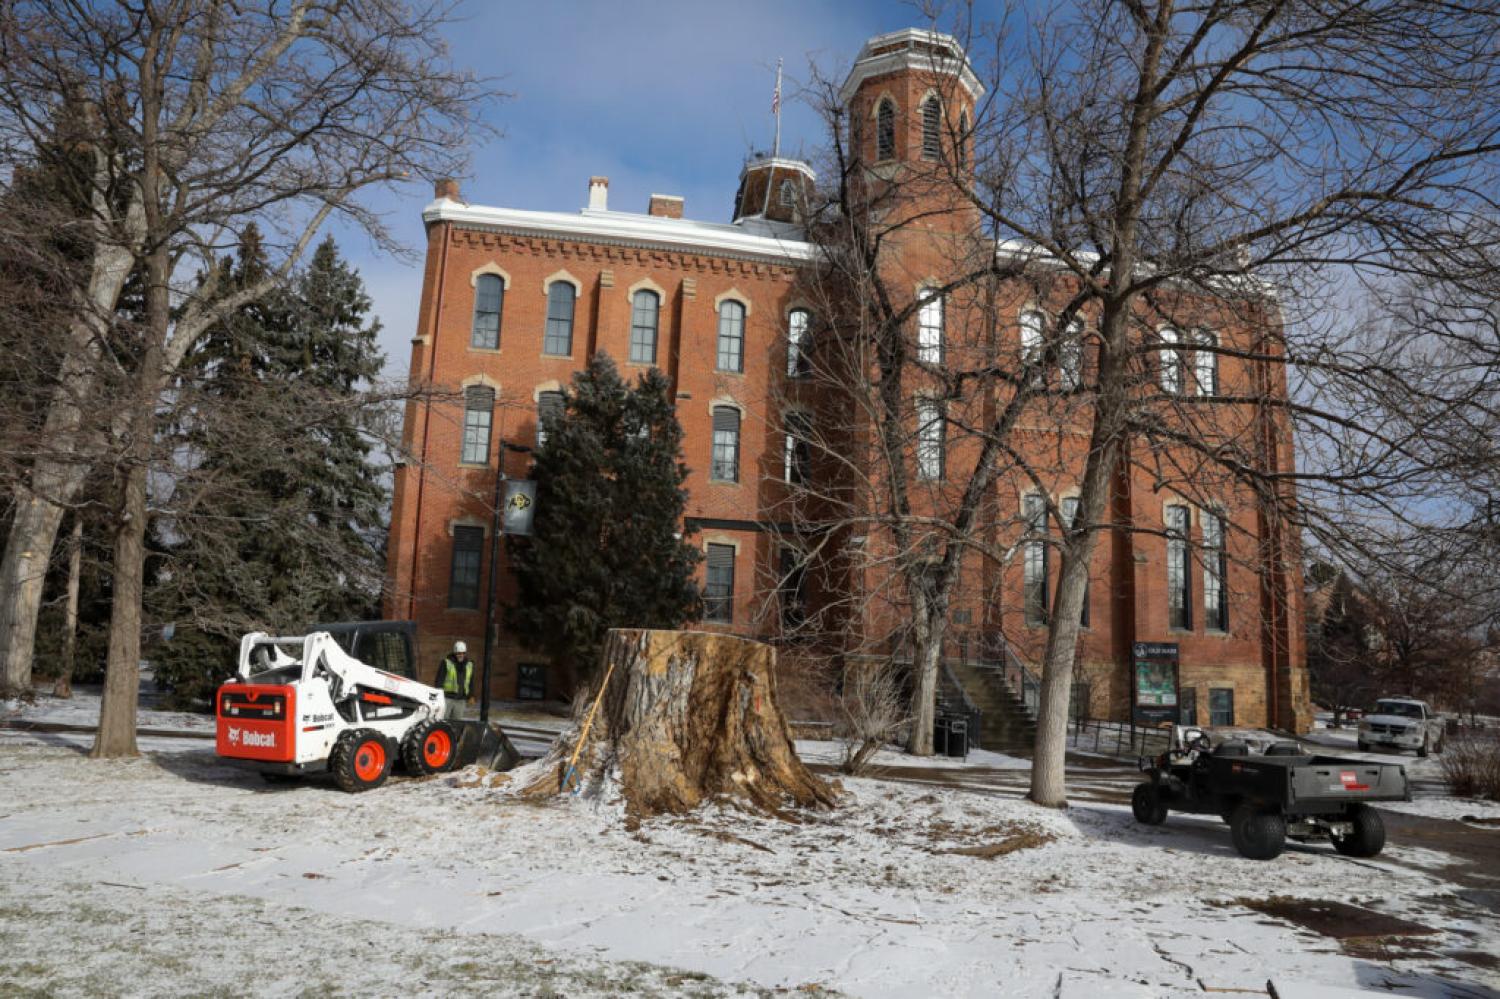 The stump of the “Old Main Cottonwood” on Thursday, Jan. 20, 2022. The tree has been taken down after 140 years, but not before cuttings were taken so that clones of the tree can be propagated. The disc will be saved for artists as raw material.